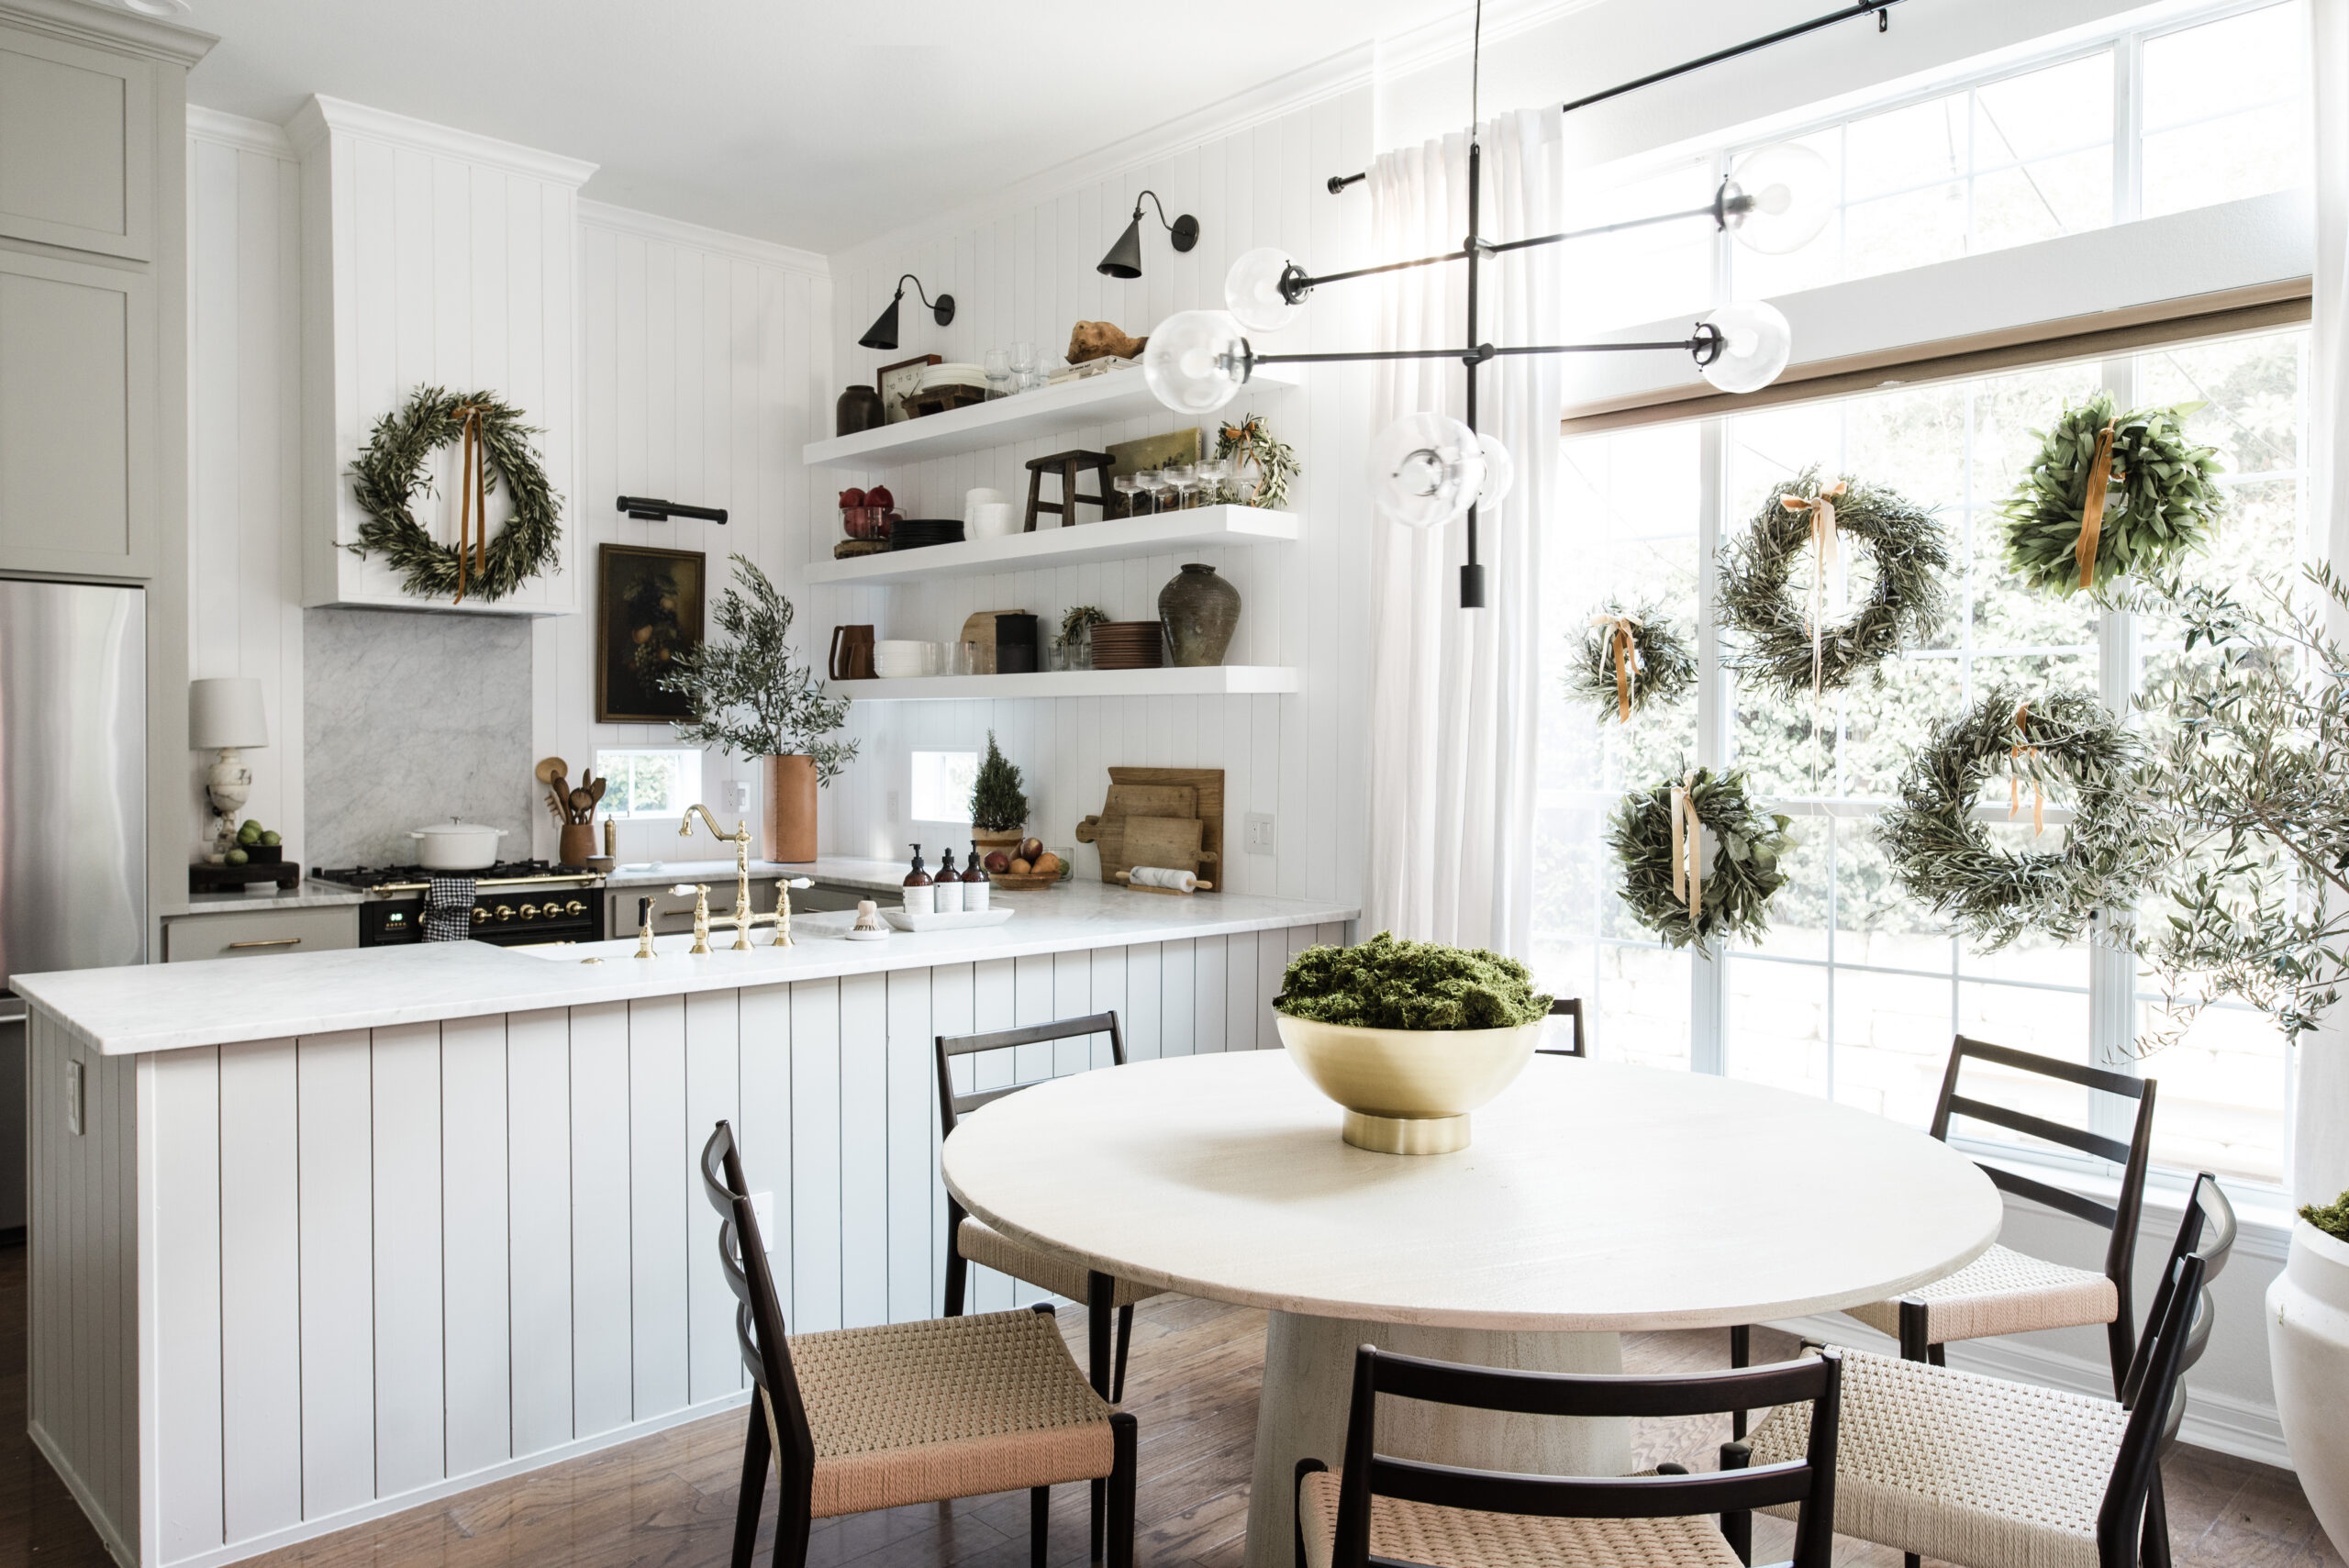 holiday wreath styling ideas for the kitchen and dining room